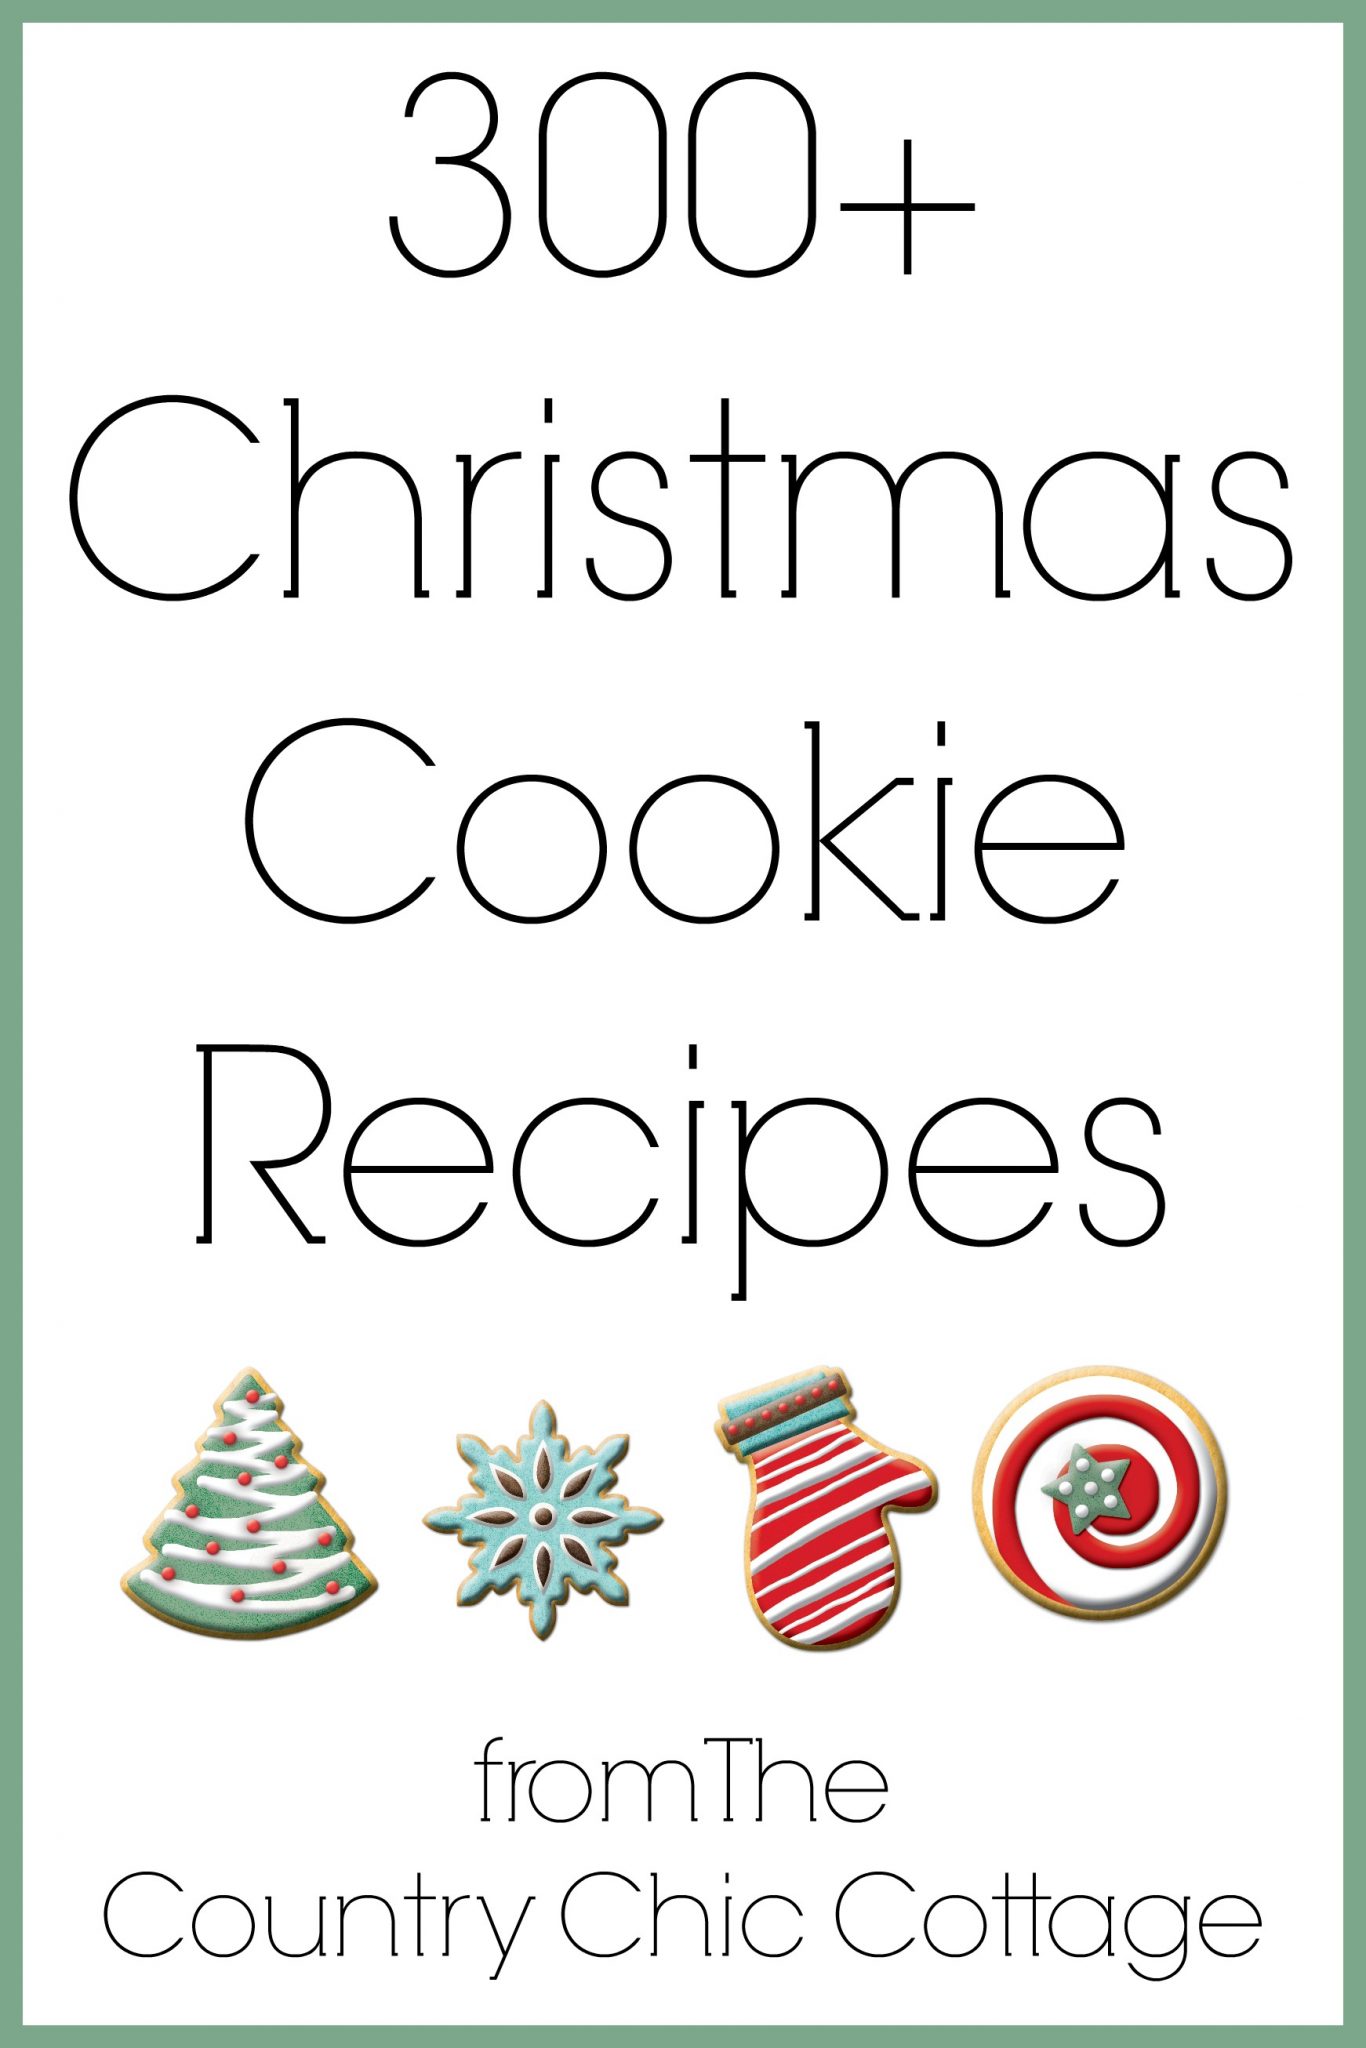 Over 300 Christmas cookie recipes -- all in one place!